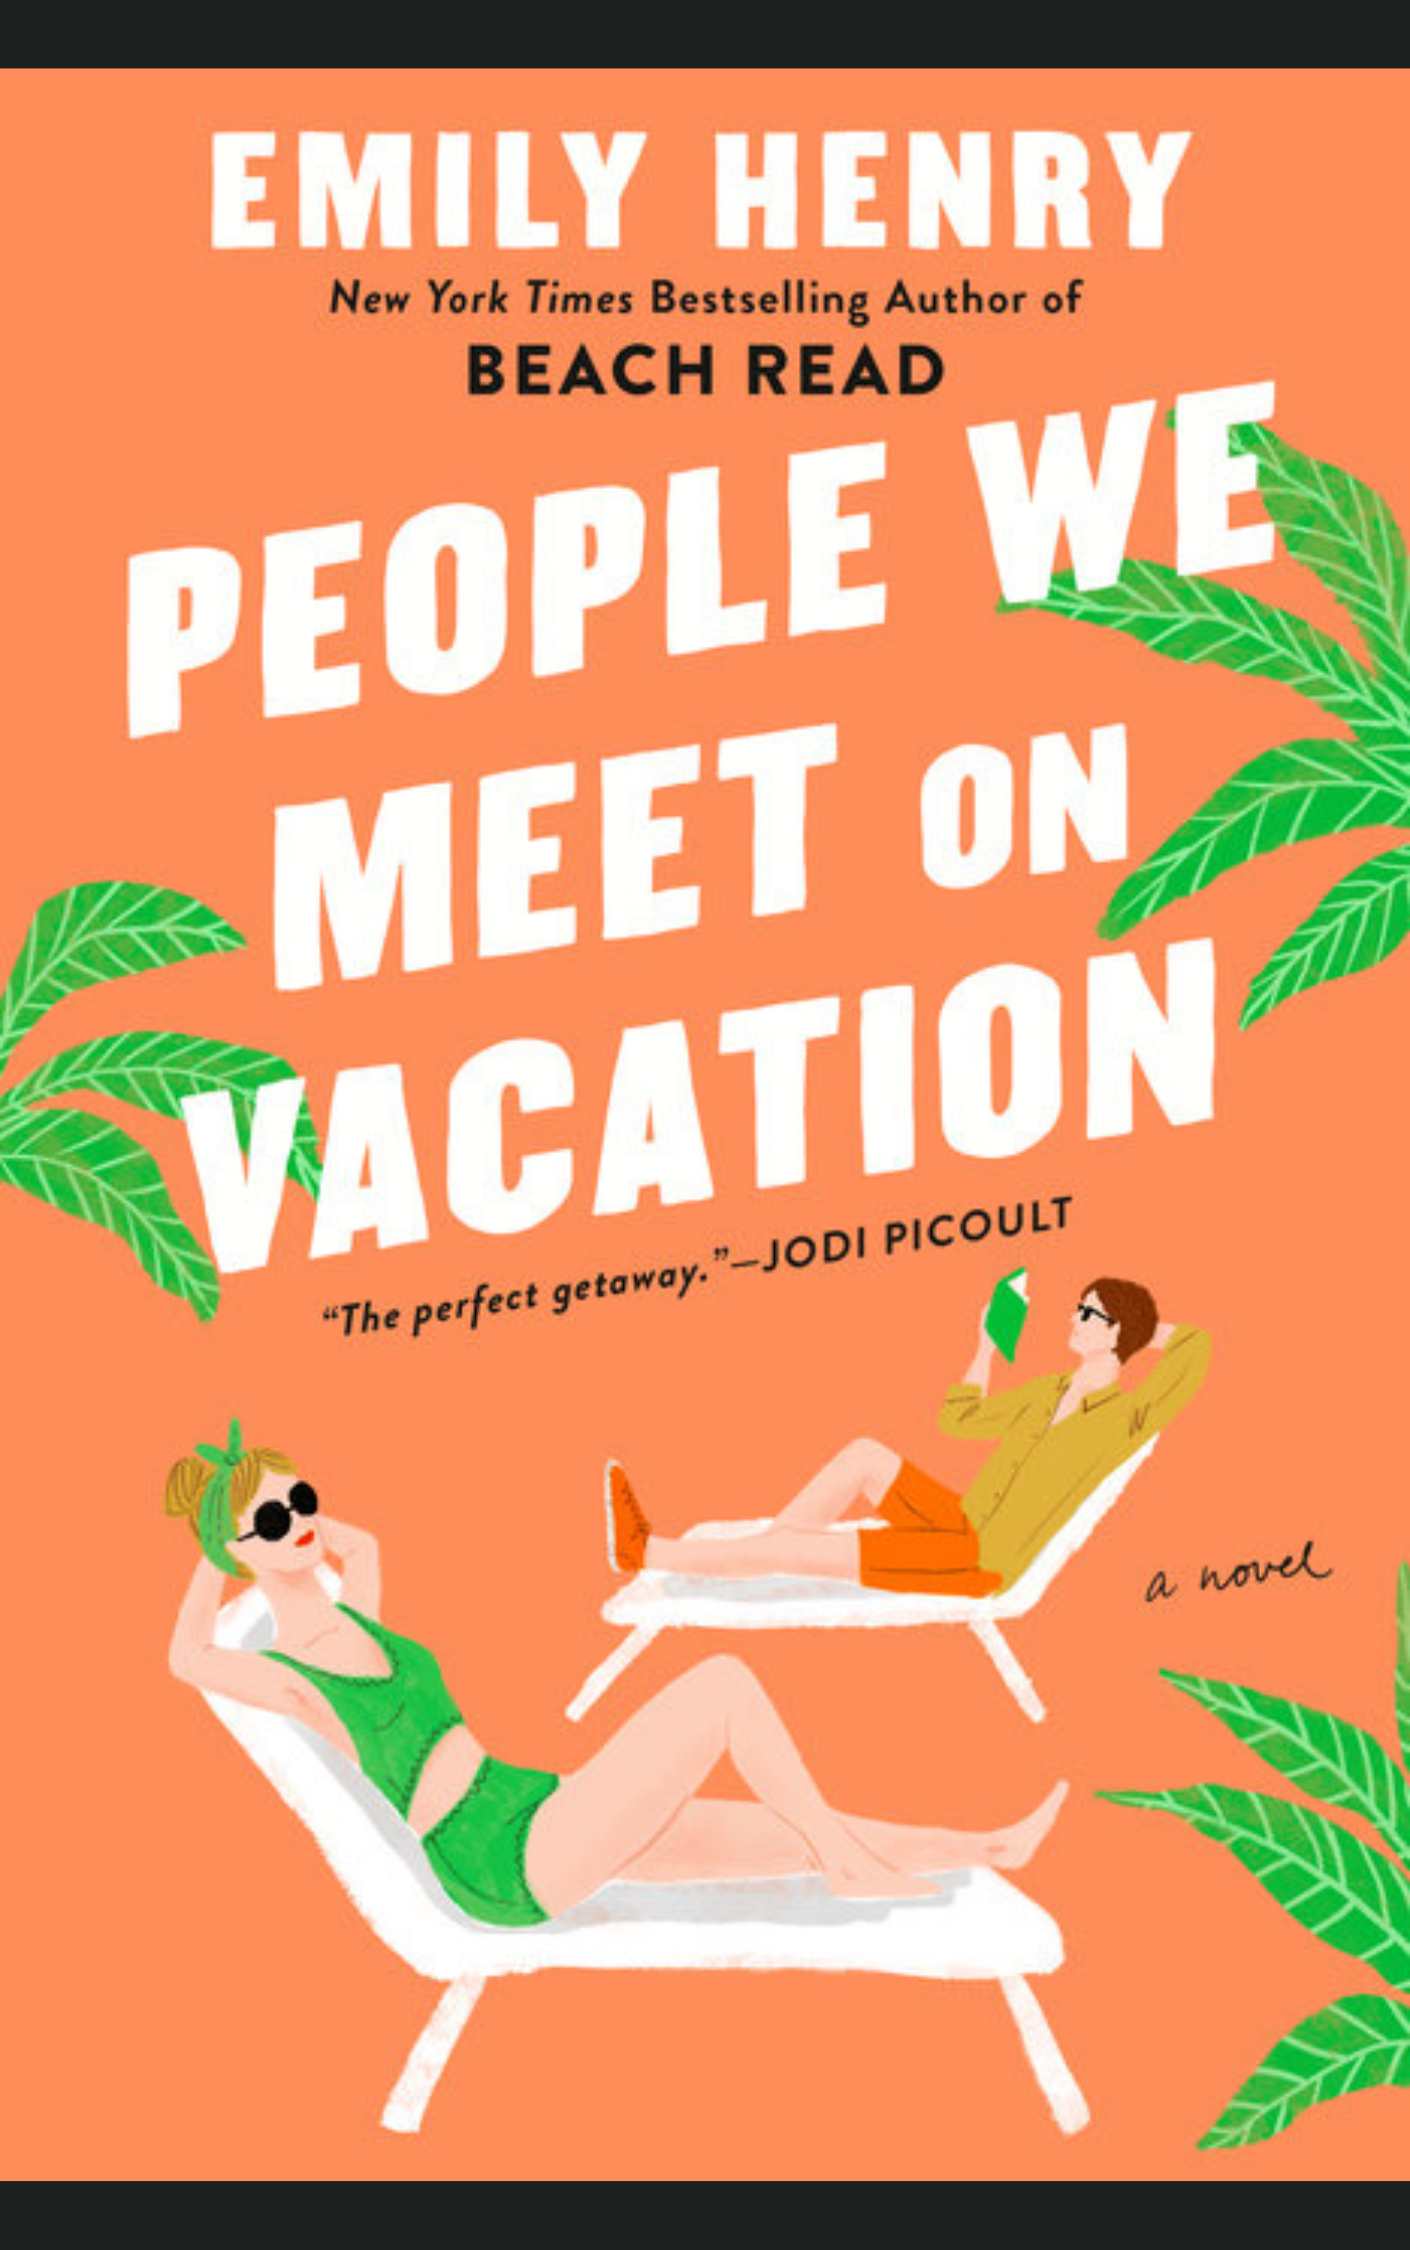 PEOPLE WE MEET ON VACATION by EMILY HENRY